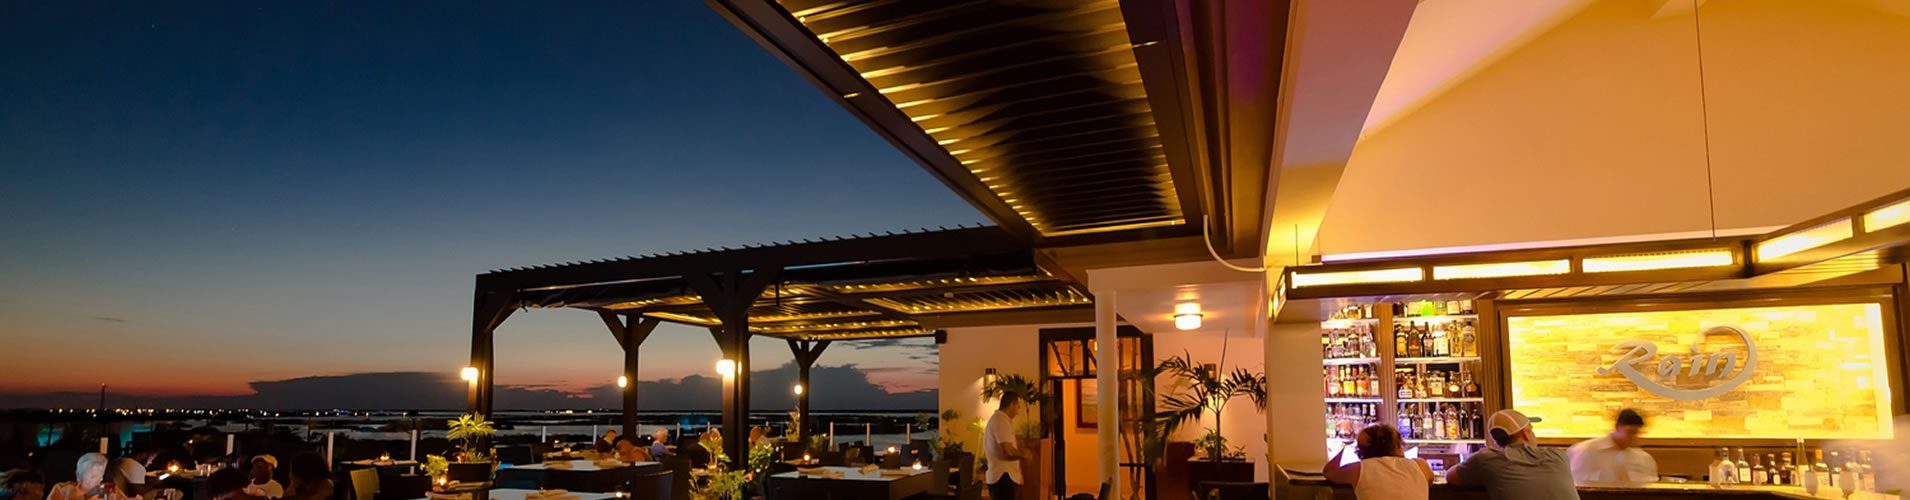 Texas restaurant Louvered Roof patio at night